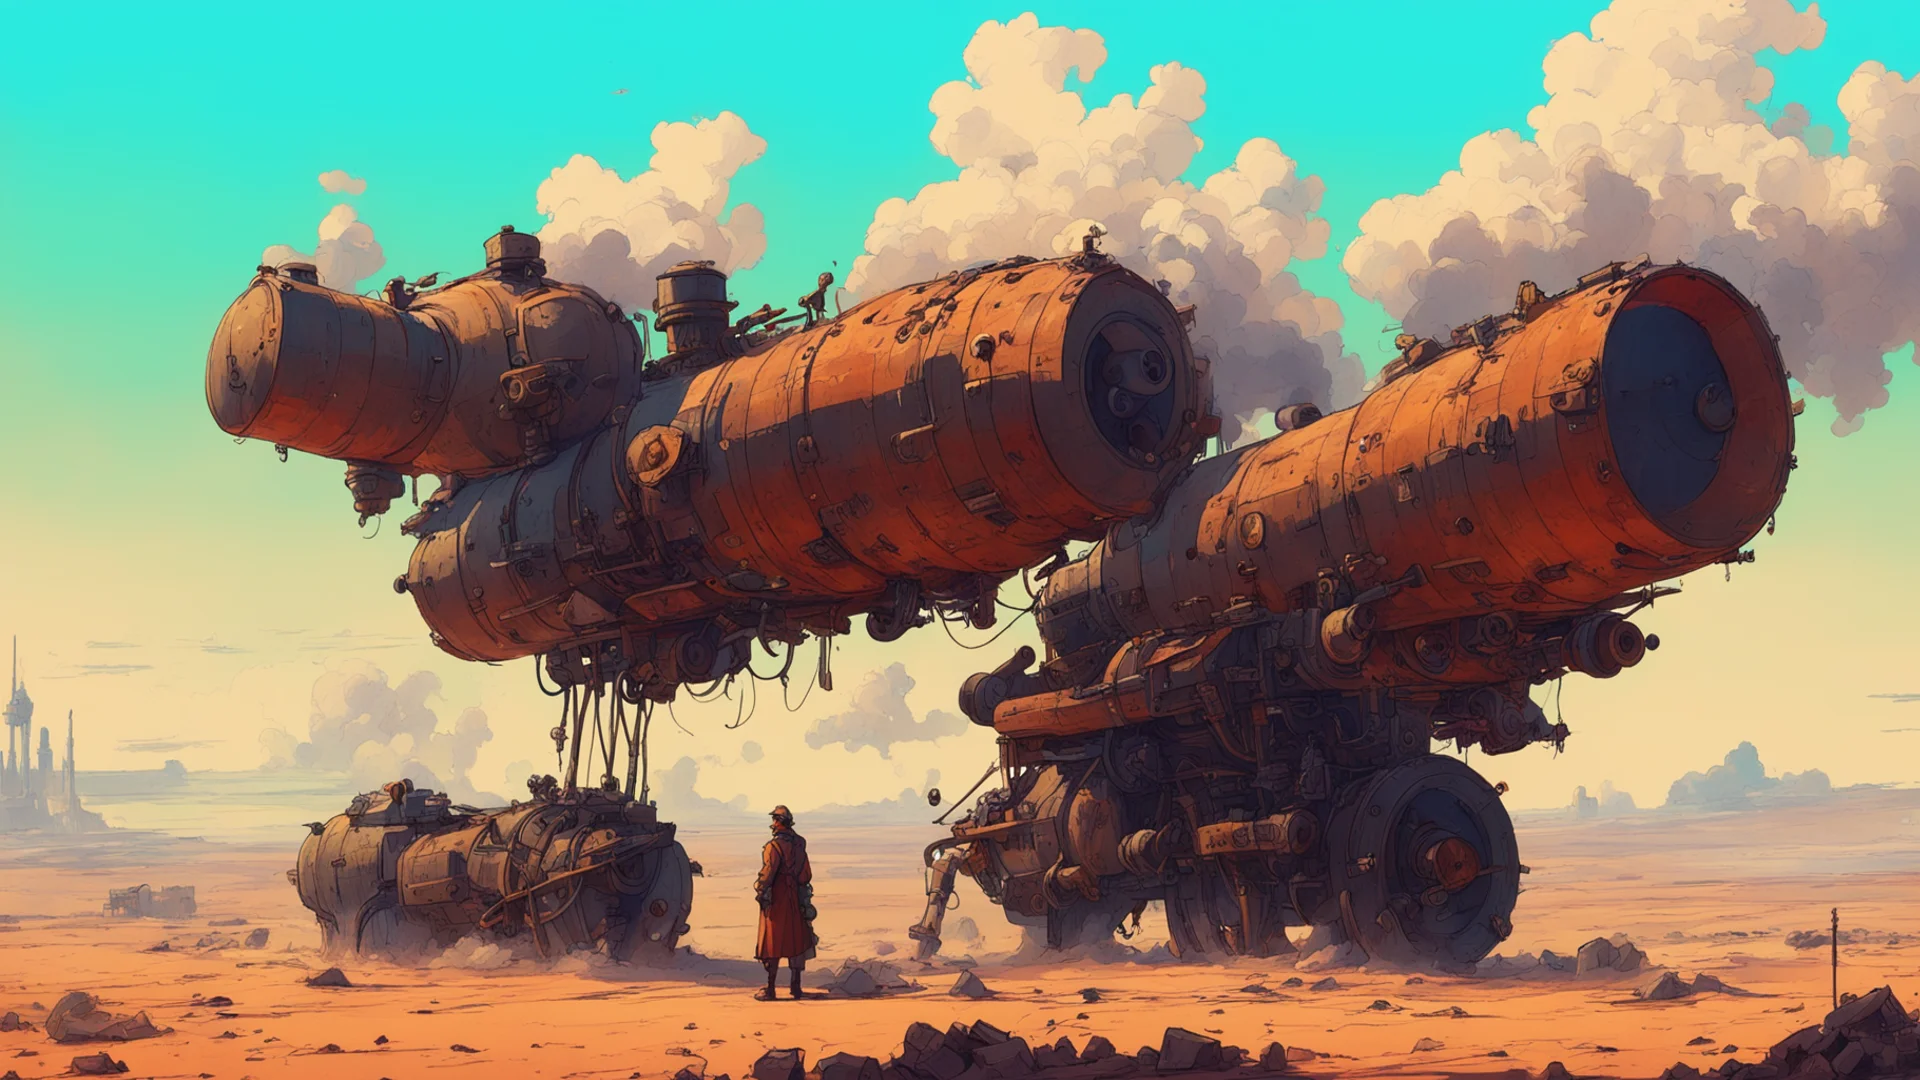 a smoking cannon designed by george lucas on a battlefield moebius ghibli ian mcque wallpaper wide